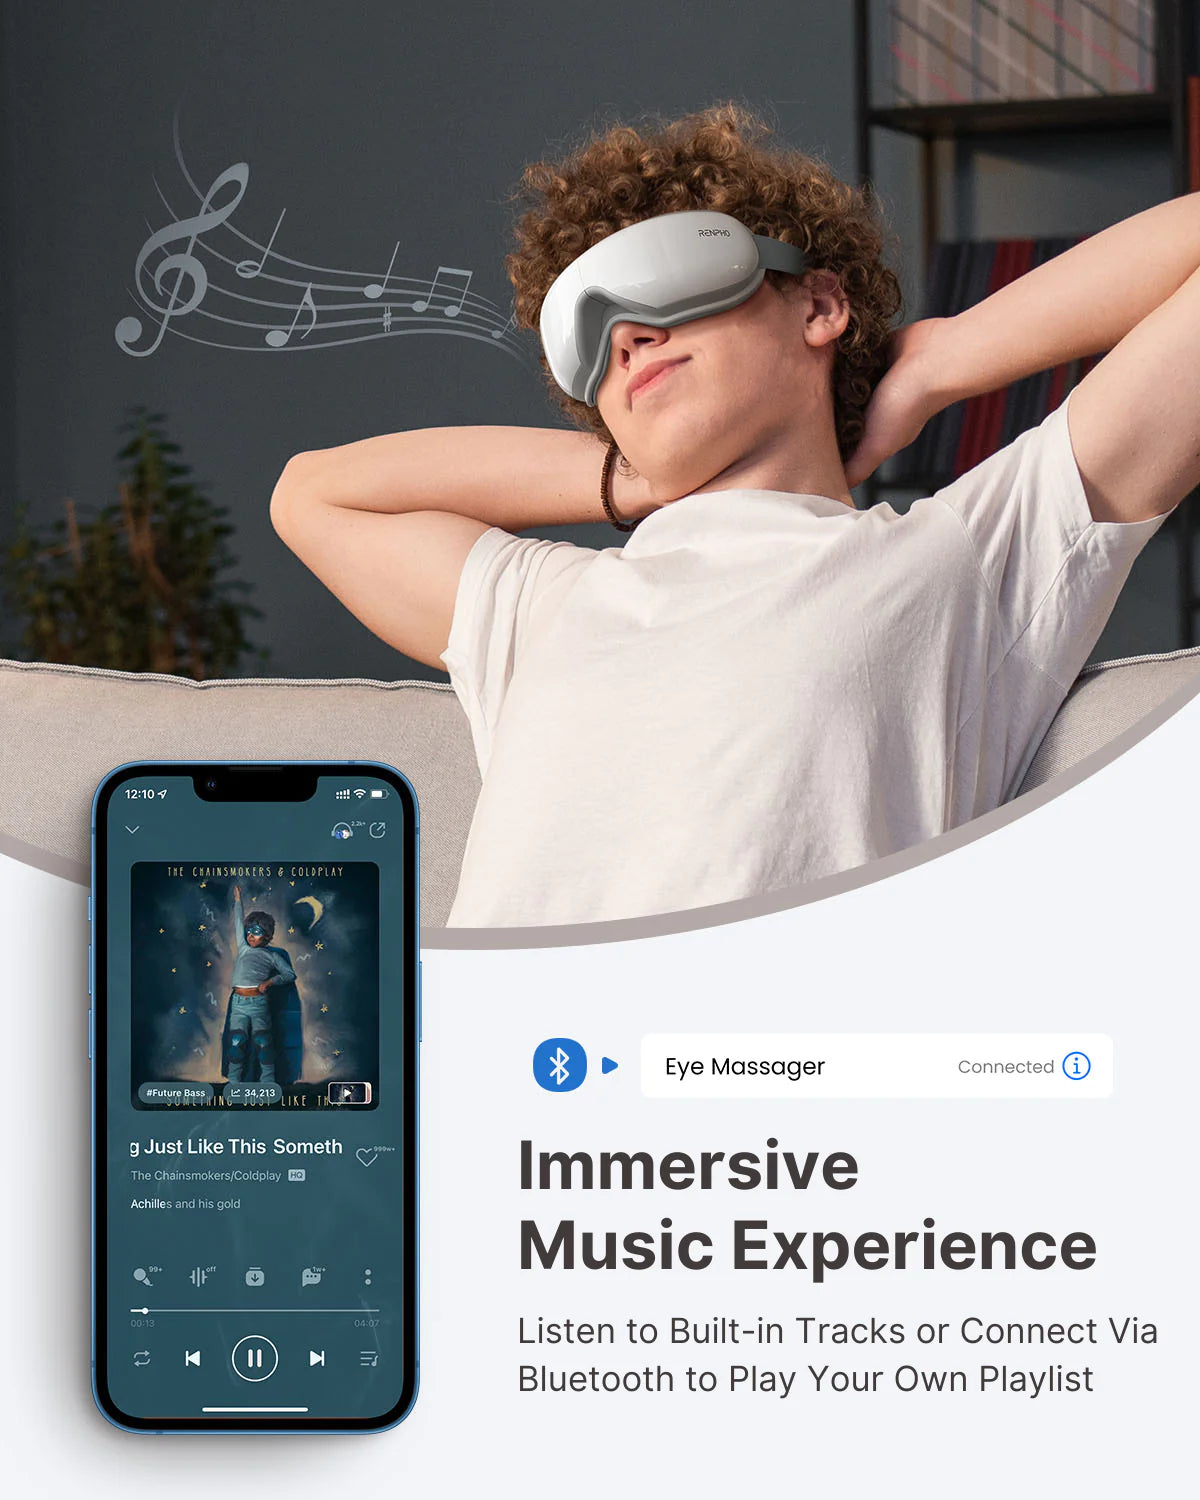 A man wearing a white t-shirt reclines on a sofa, using a Renpho EU Eyeris 1 Eye Massager to relieve eye strain. Musical notes are illustrated around his head. In the foreground, a smartphone screen shows a music player app playing "I Just Like This Someth" by The Gathering Ensemble. The text reads, "Immersive Music Experience. Listen to Built-in Tracks or Connect Via Bluetooth to Play Your Music.